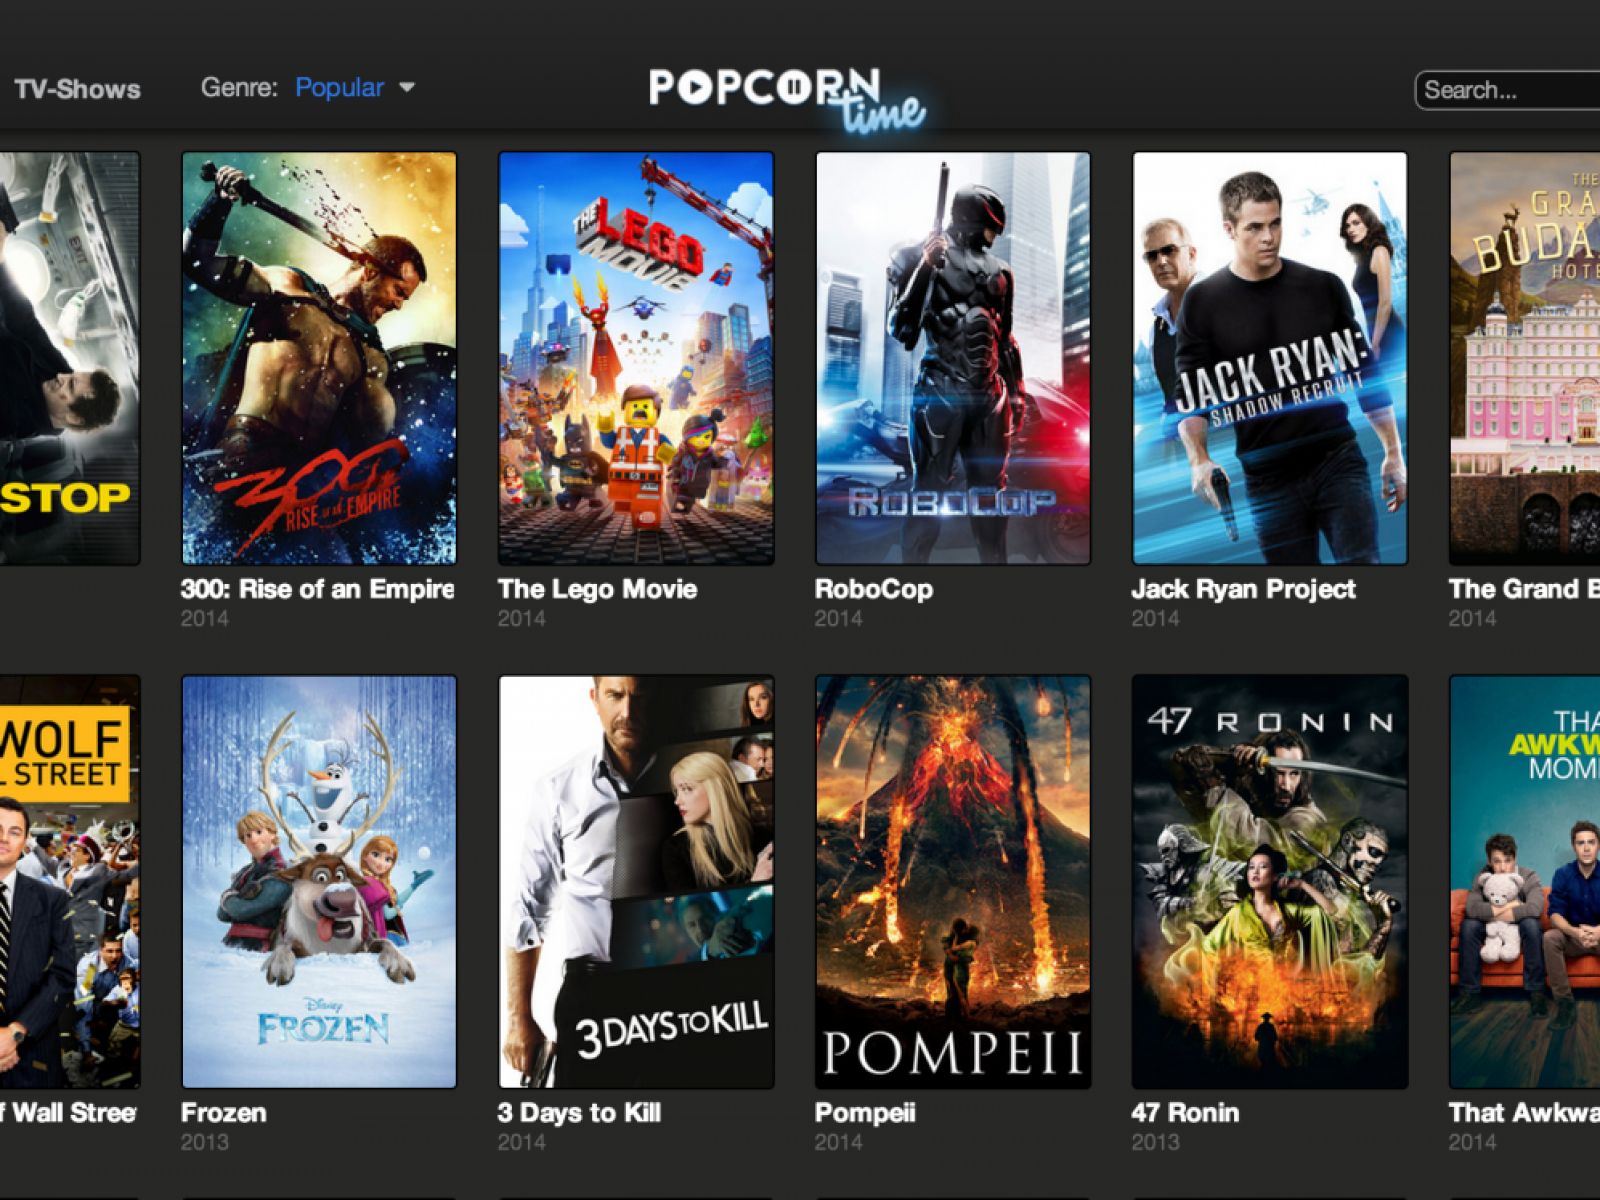 How To Cast Popcorn Time From PC To Chromecast